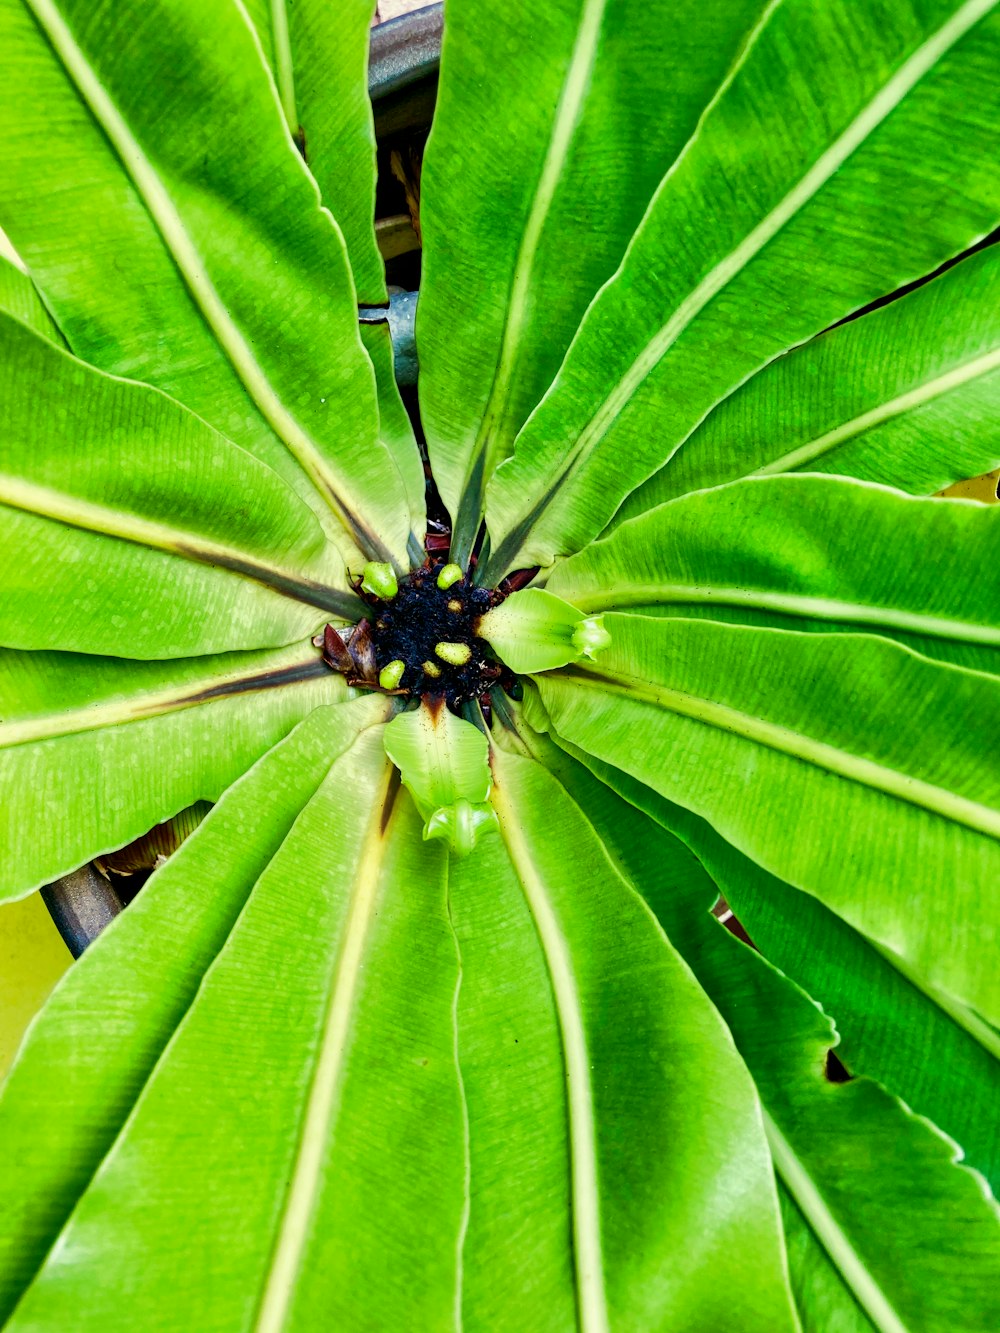 a large green leaf with a black center